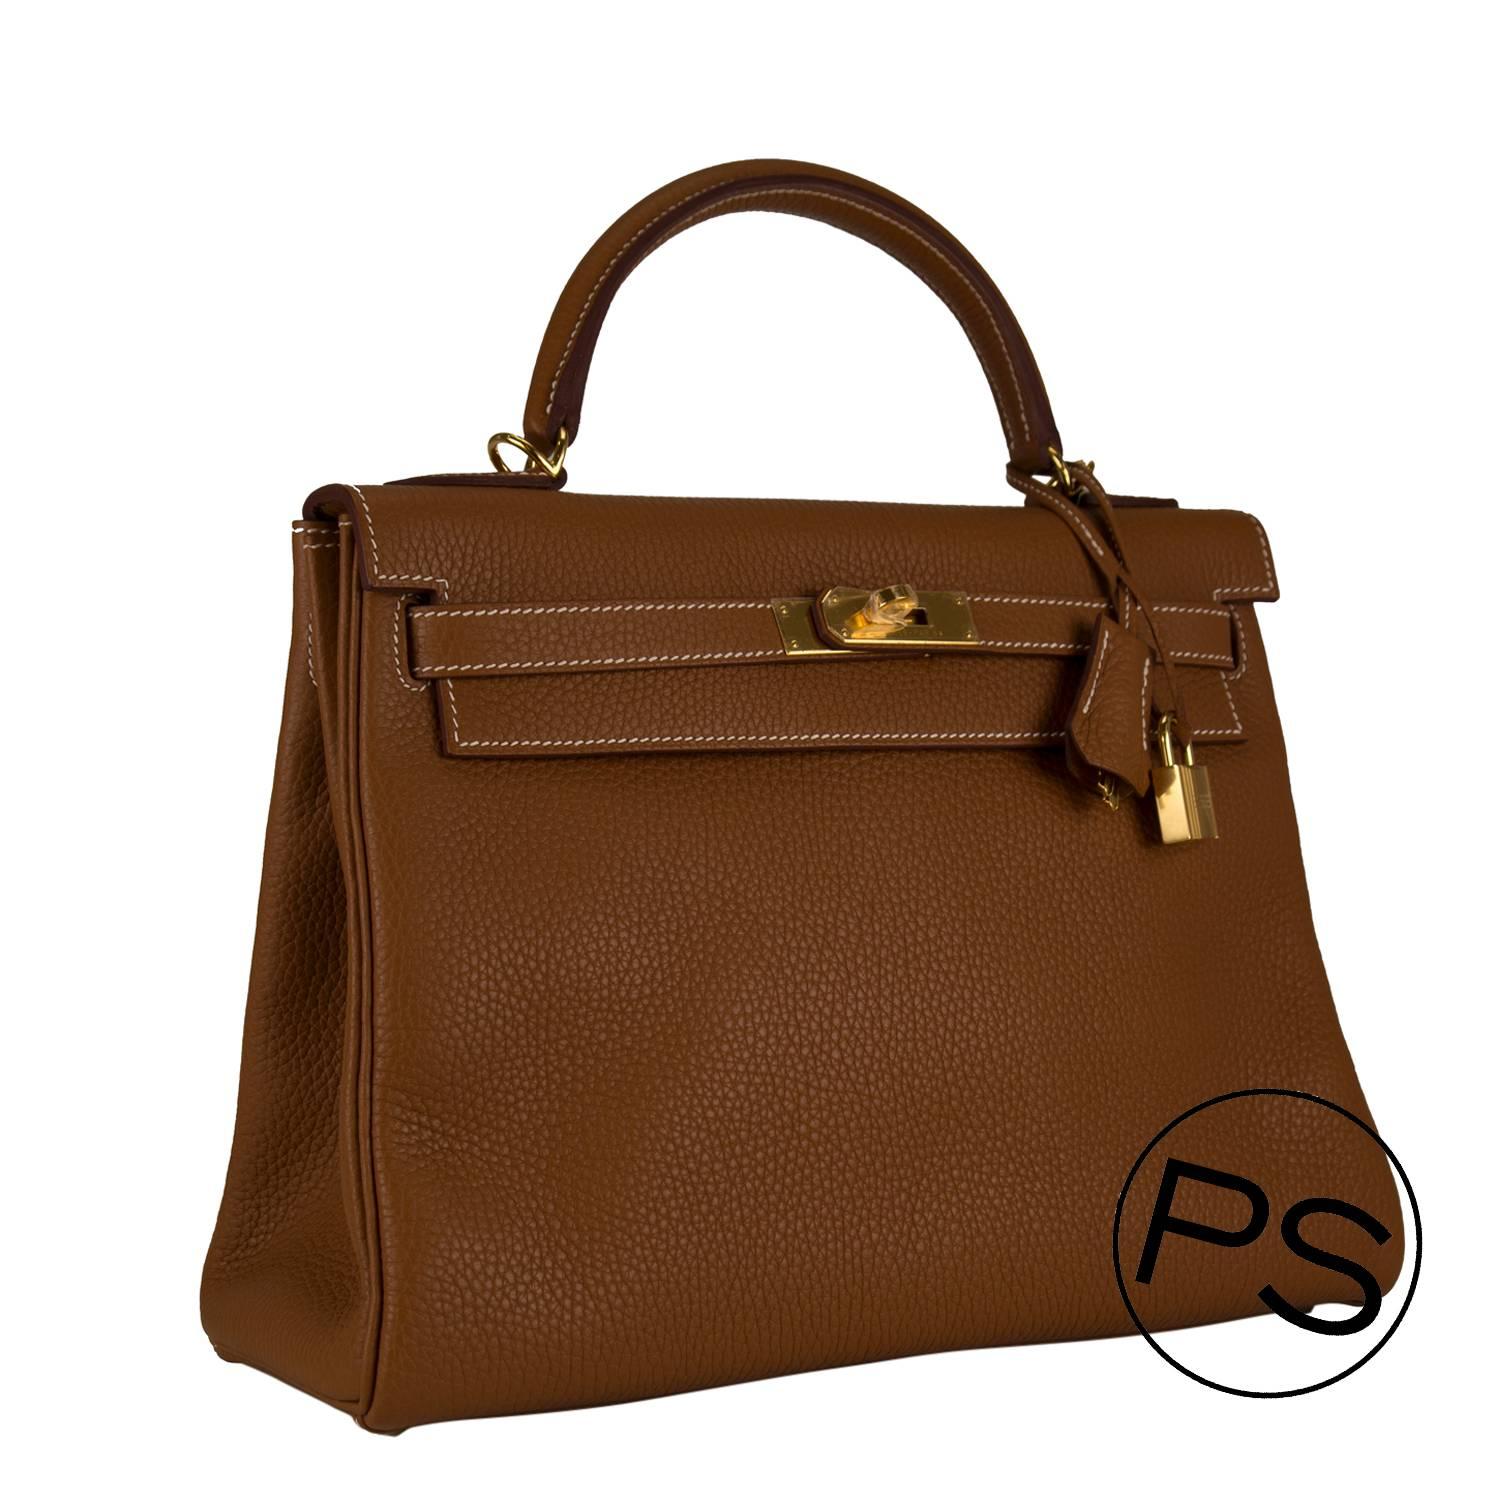 Hermes Kelly II retourne 32 Taurillion Clemence Brown Gold Hardware 2015

Pre-owned and never used.

Bought it in Hermes store in 2015.

Model: KELLY

Dimensions: 32x23x10.5cm

Color: Gold

Details:
*Protective felt removed for purposes